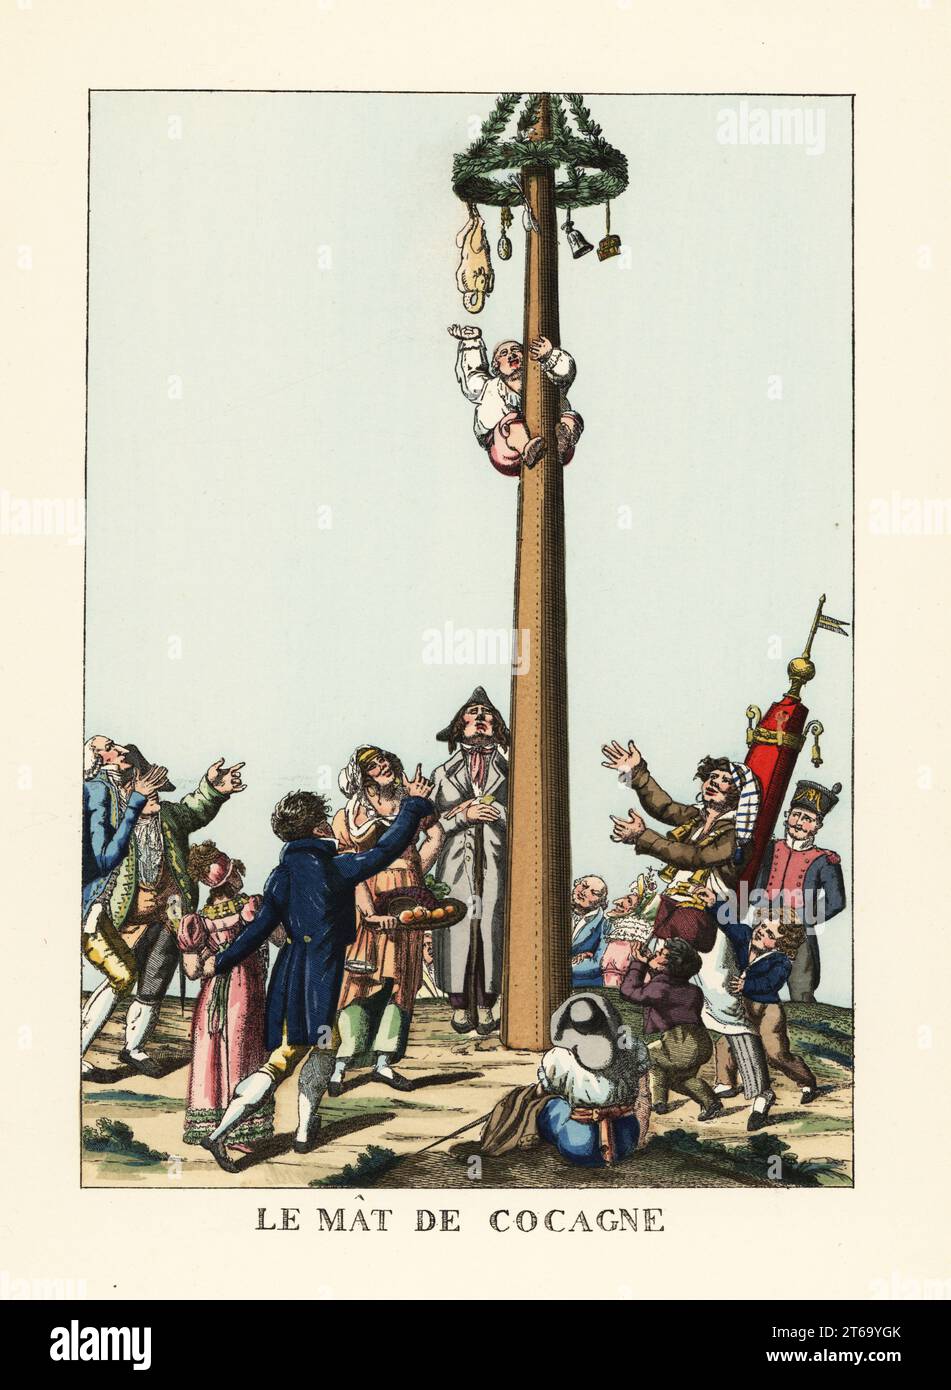 A man climbing a greasy pole for a prize goose, France, early 19th century. A soldier, tisane vendor, orange seller, and others watch. Le Mat de Cocagne. Handcoloured lithograph from Henry Rene dAllemagnes Recreations et Passe-Temps, Games and Pastimes, Hachette, Paris, 1906. Stock Photo